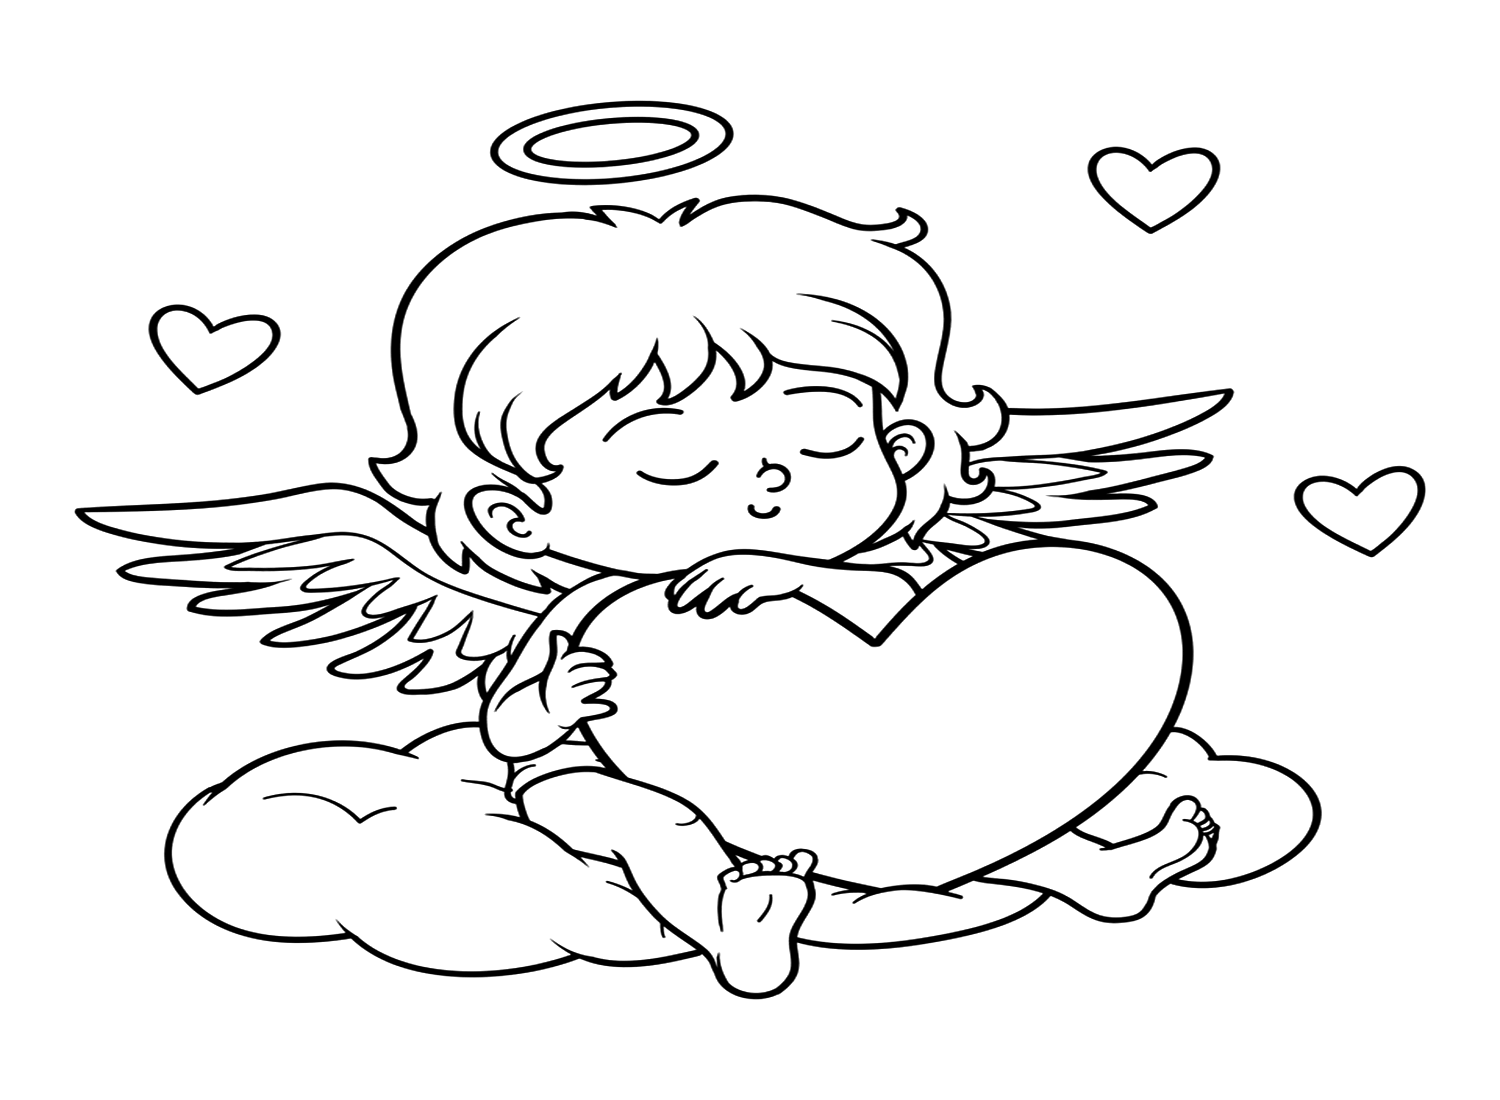 Simple Angel Coloring Page